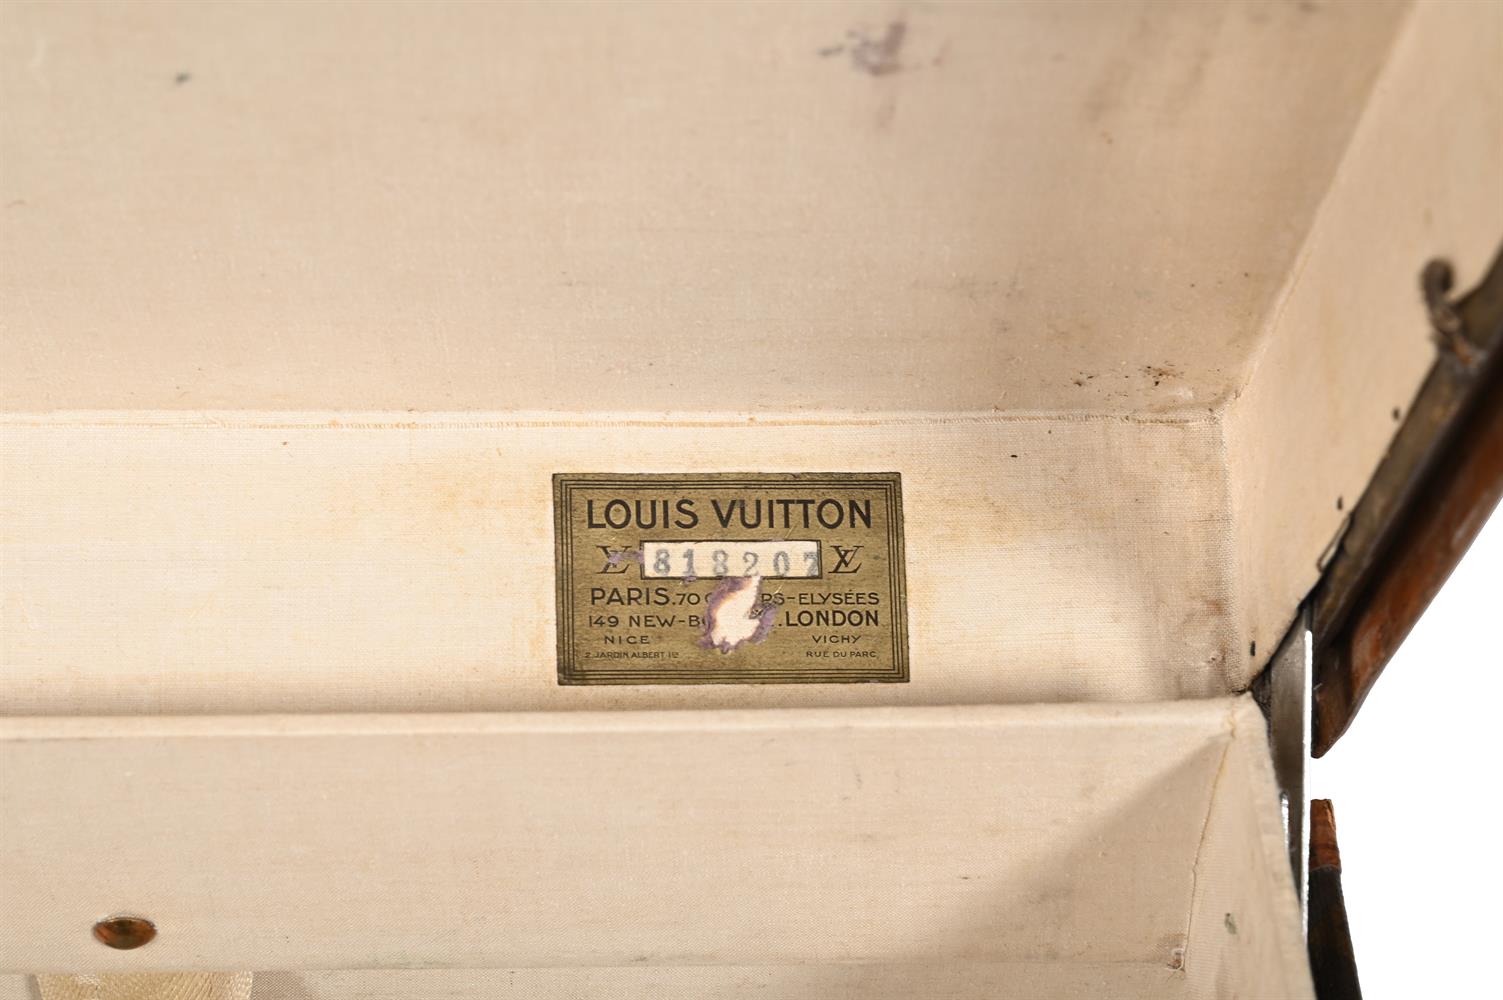 LOUIS VUITTON, A MONOGRAMMED COATED CANVAS HARD SUITCASE - Image 2 of 3